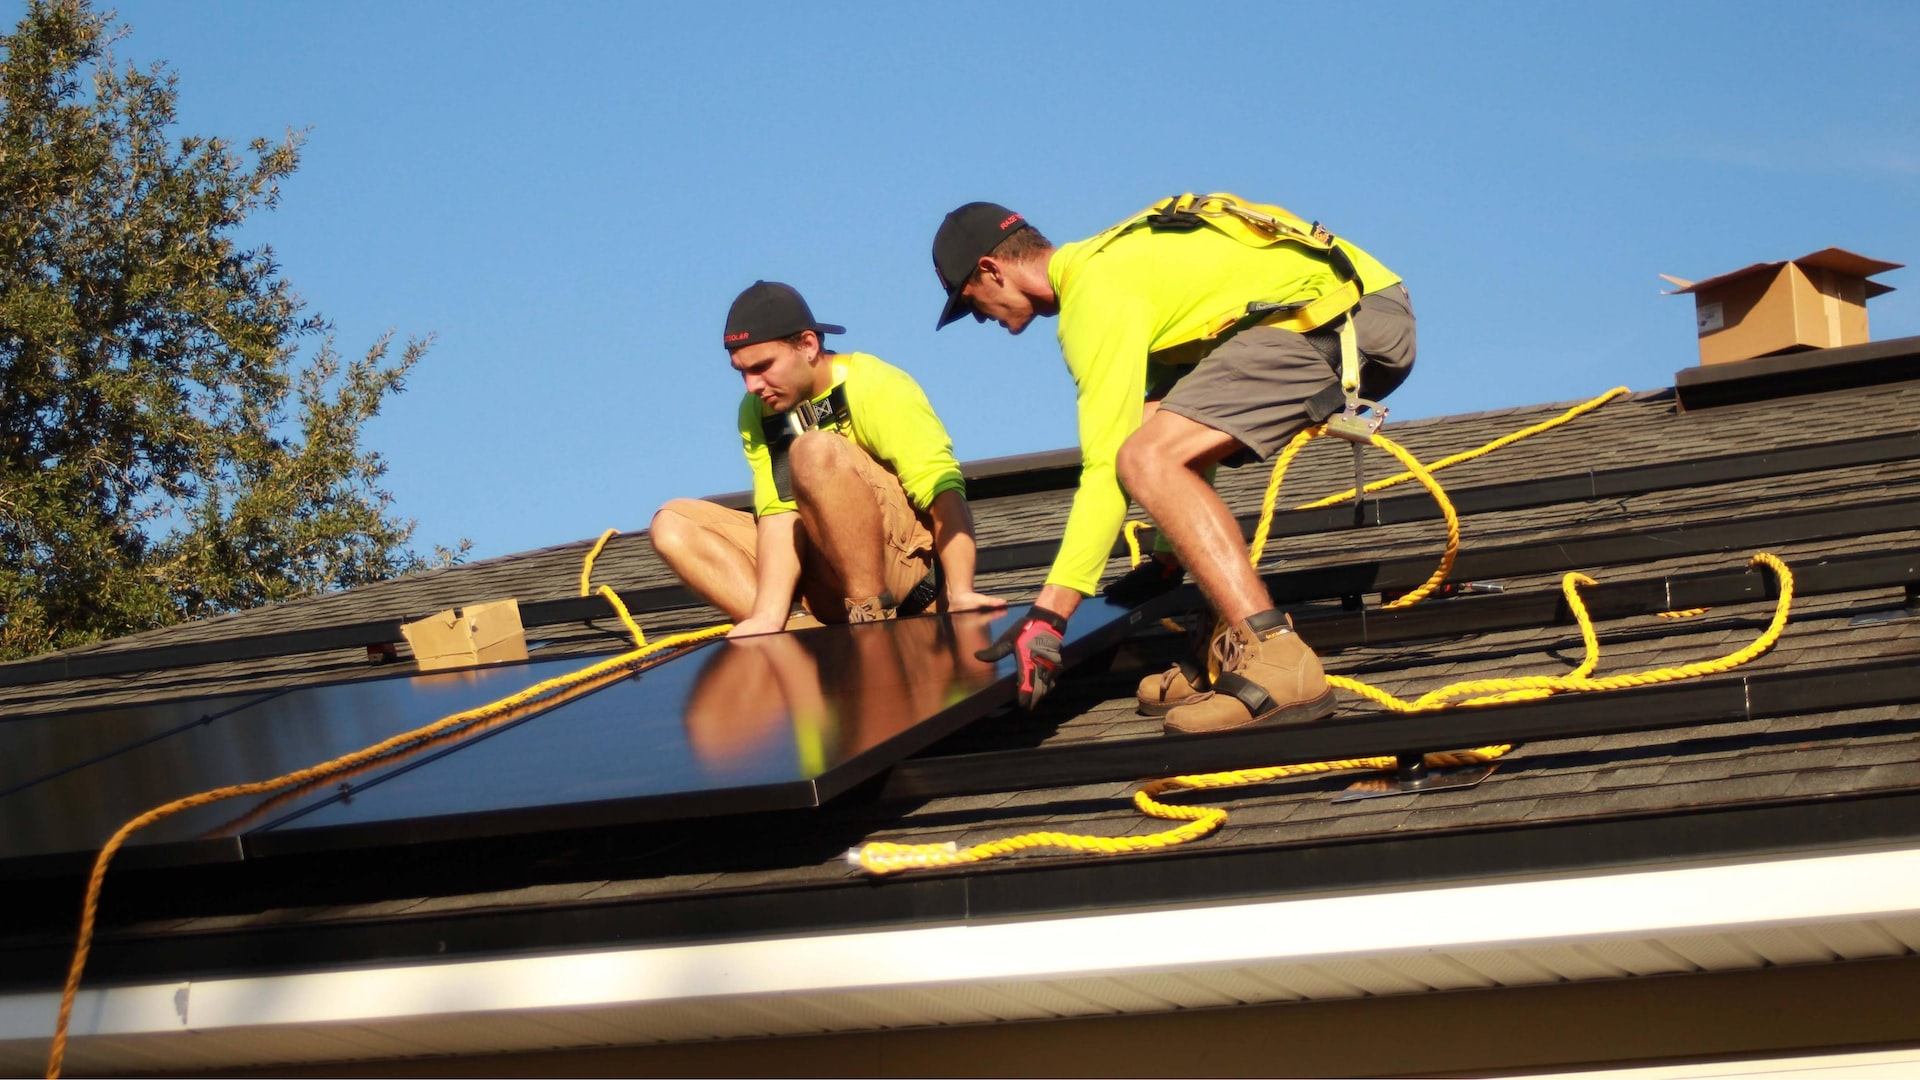 Rockwall solar panels being installed on a roof of a house in Rockwall, Texas.